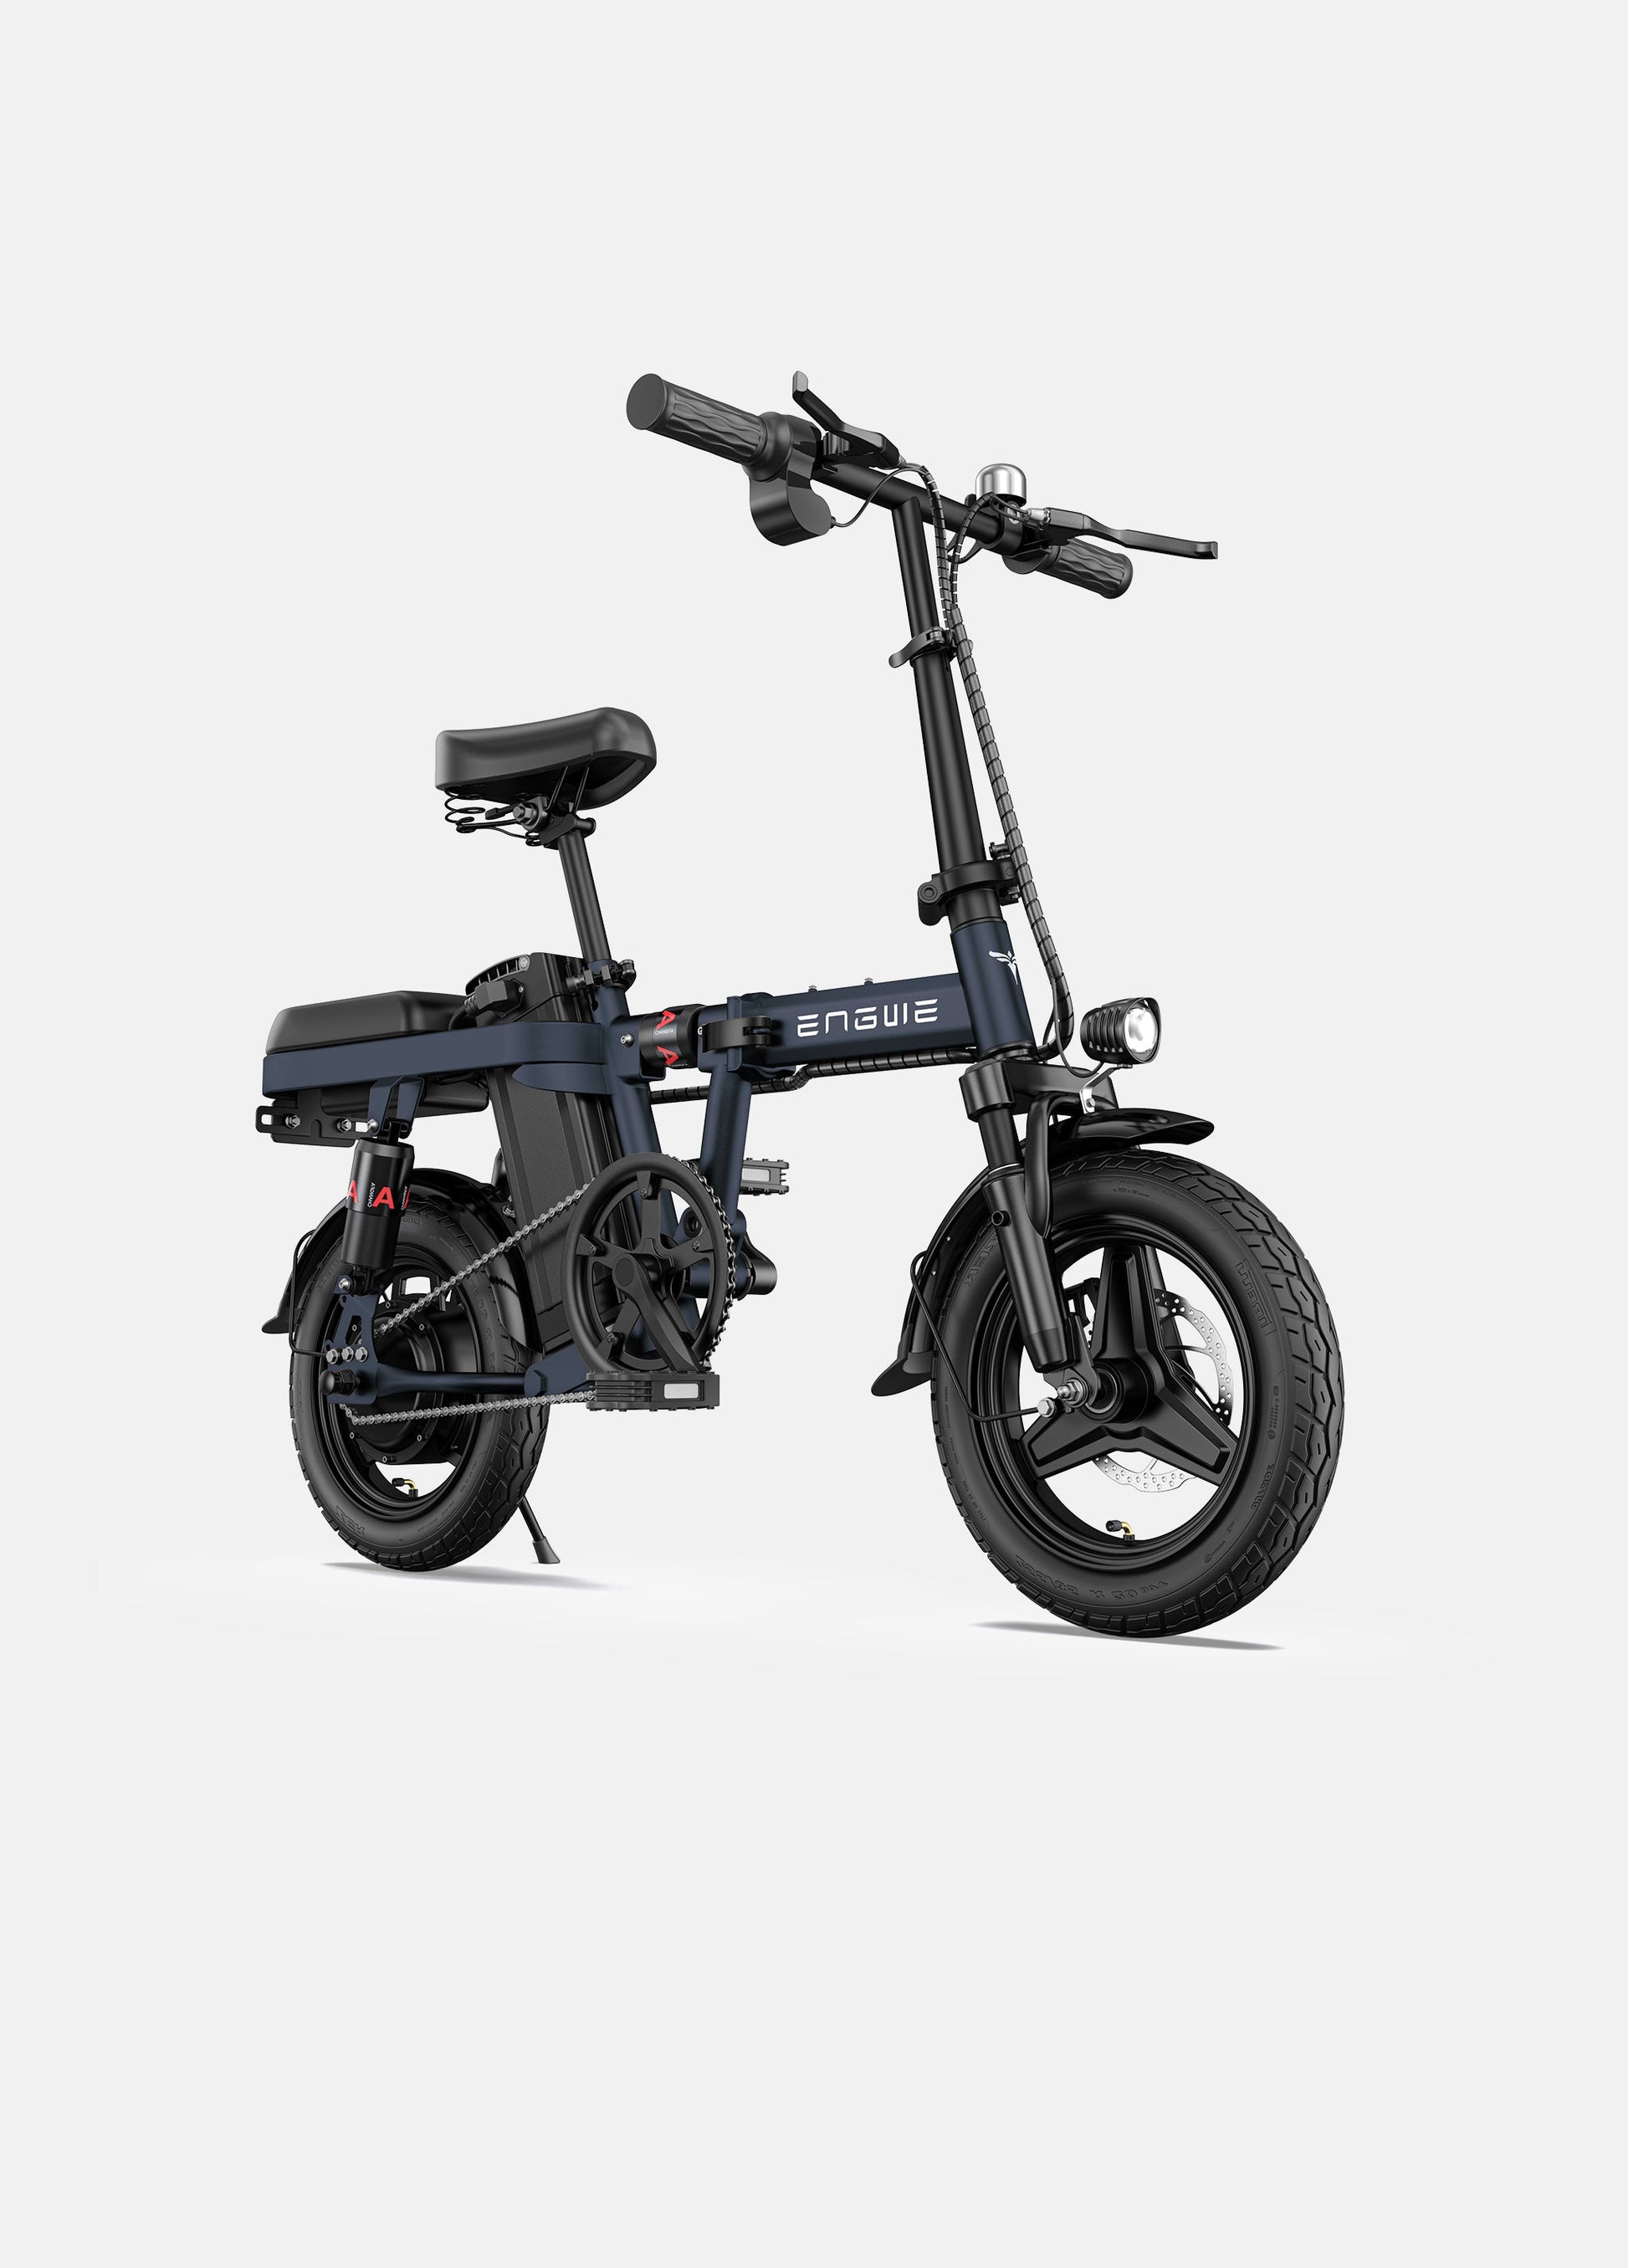 Blue Engwe T14 folding ebike, demonstrating the versatility and urban appeal of this modern electric bicycle.